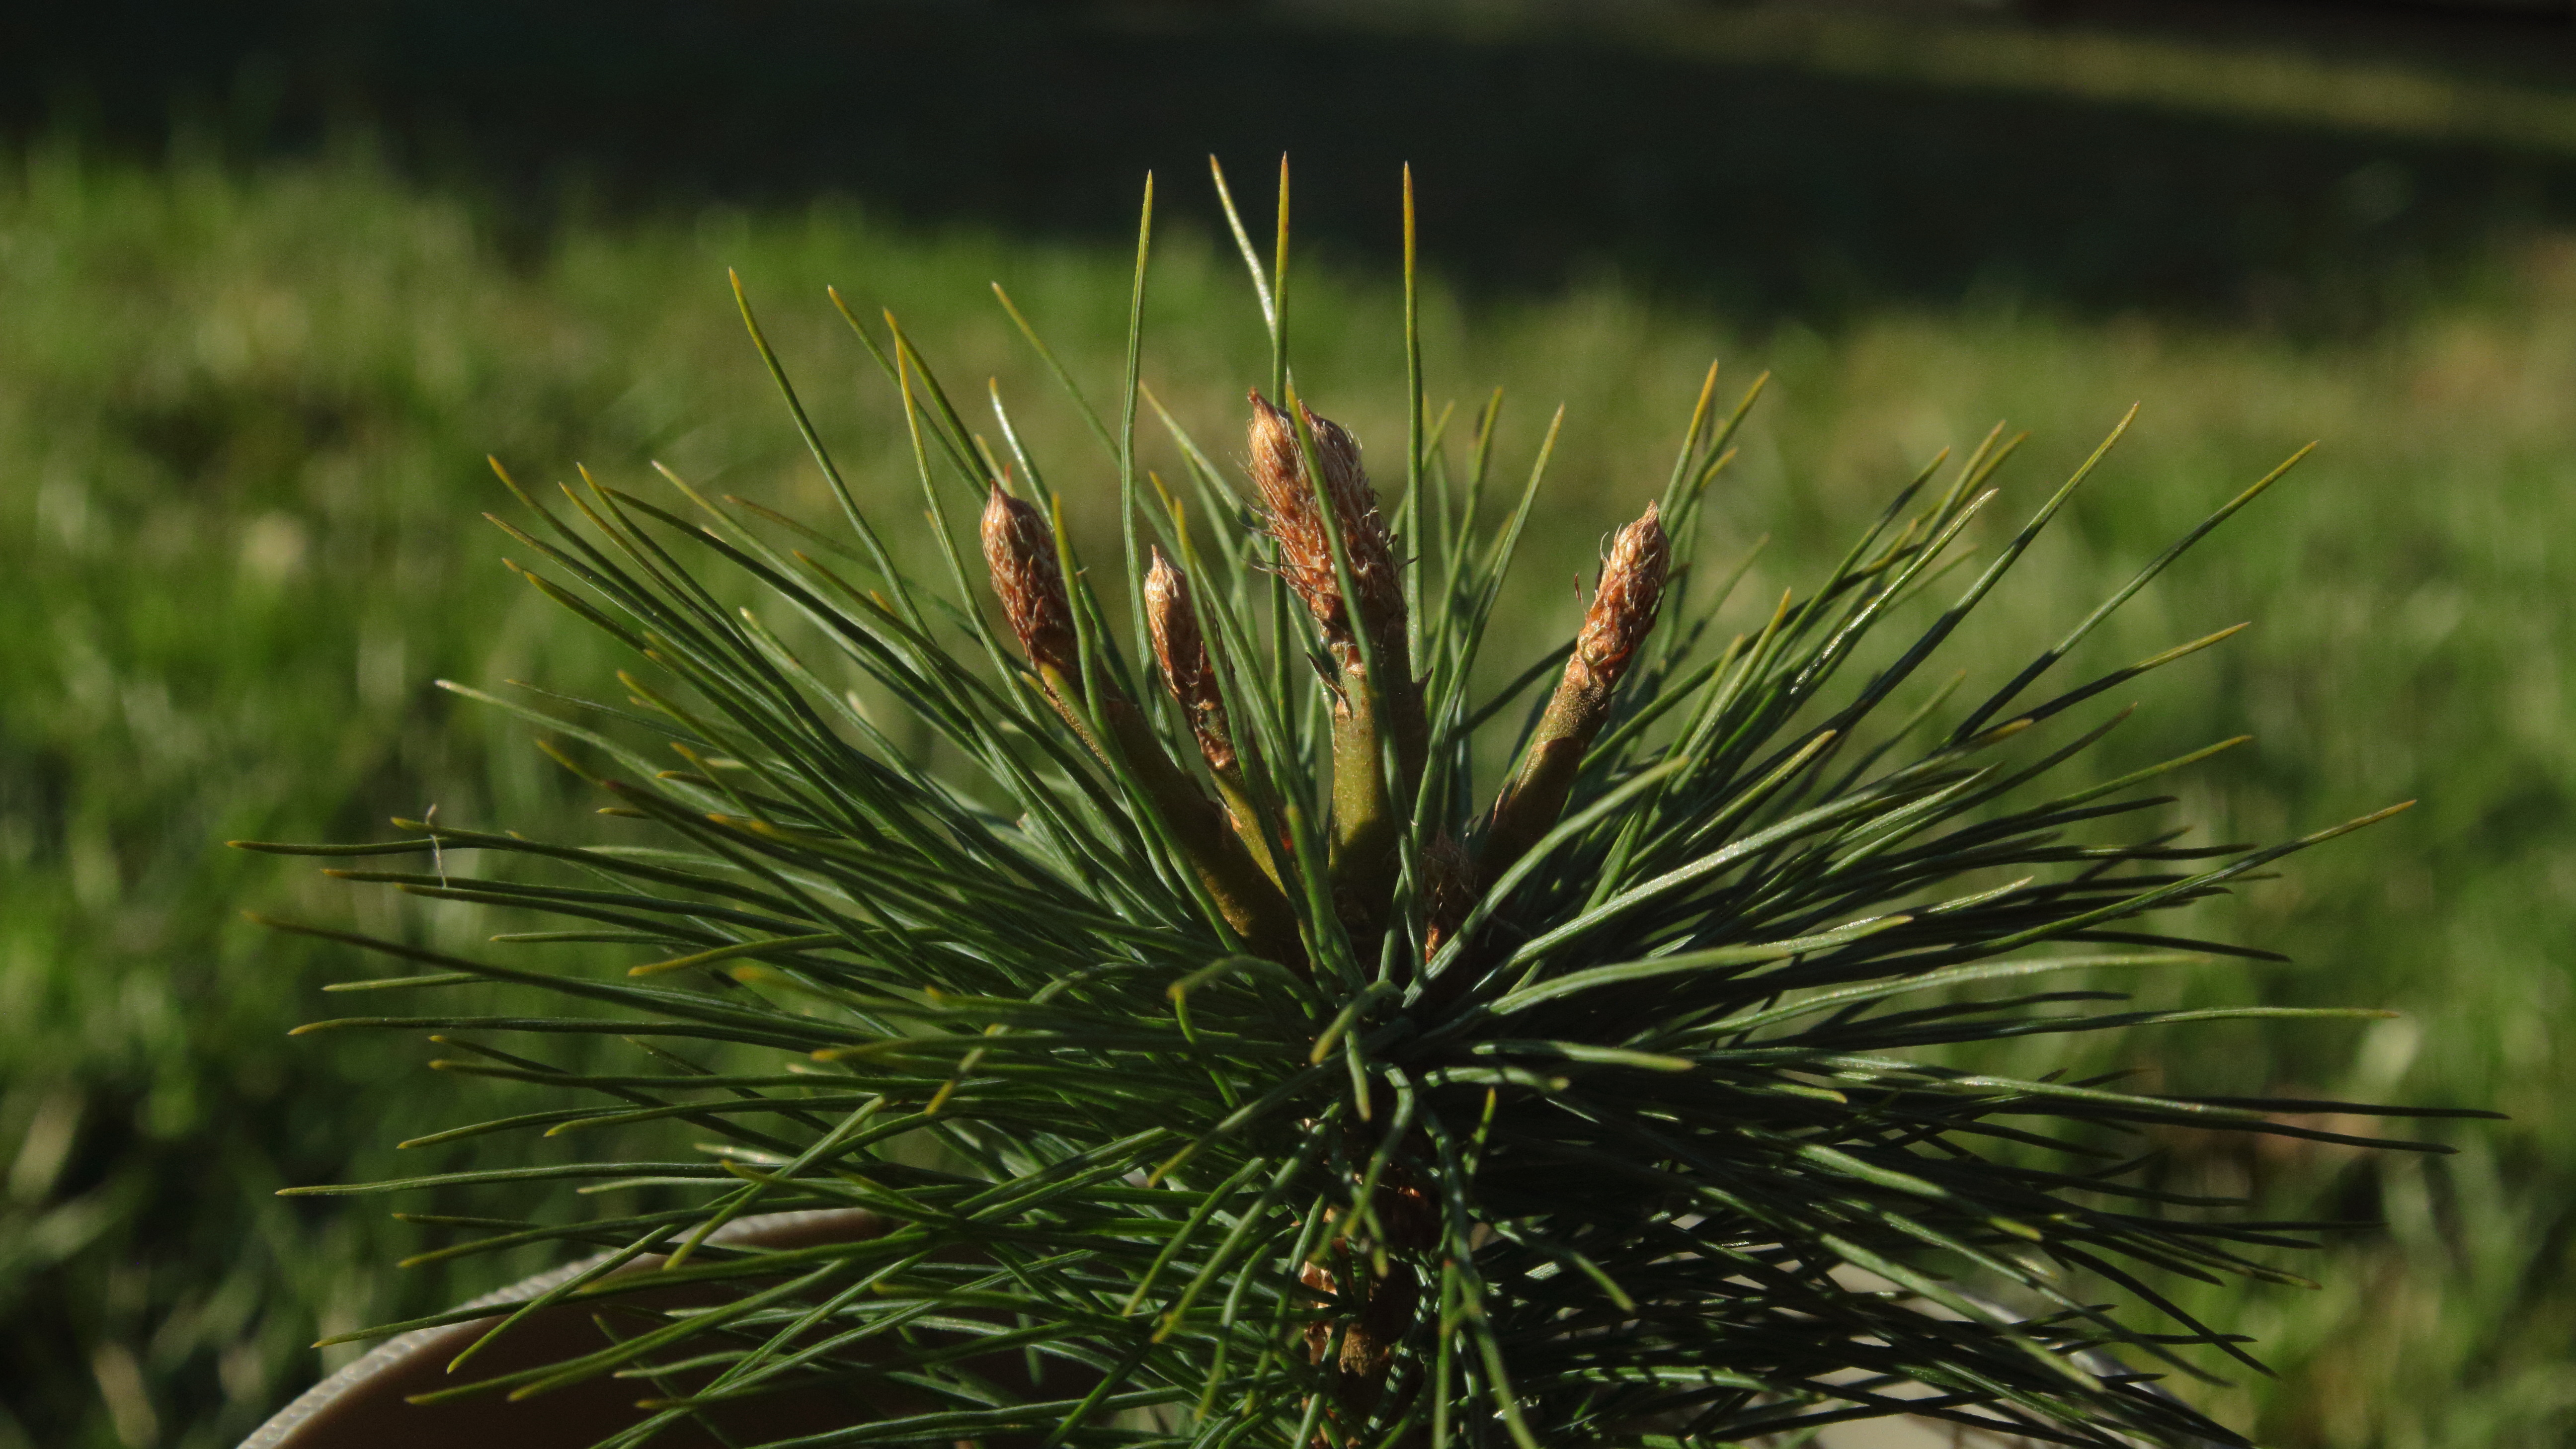 A picture of a Pine Sapling